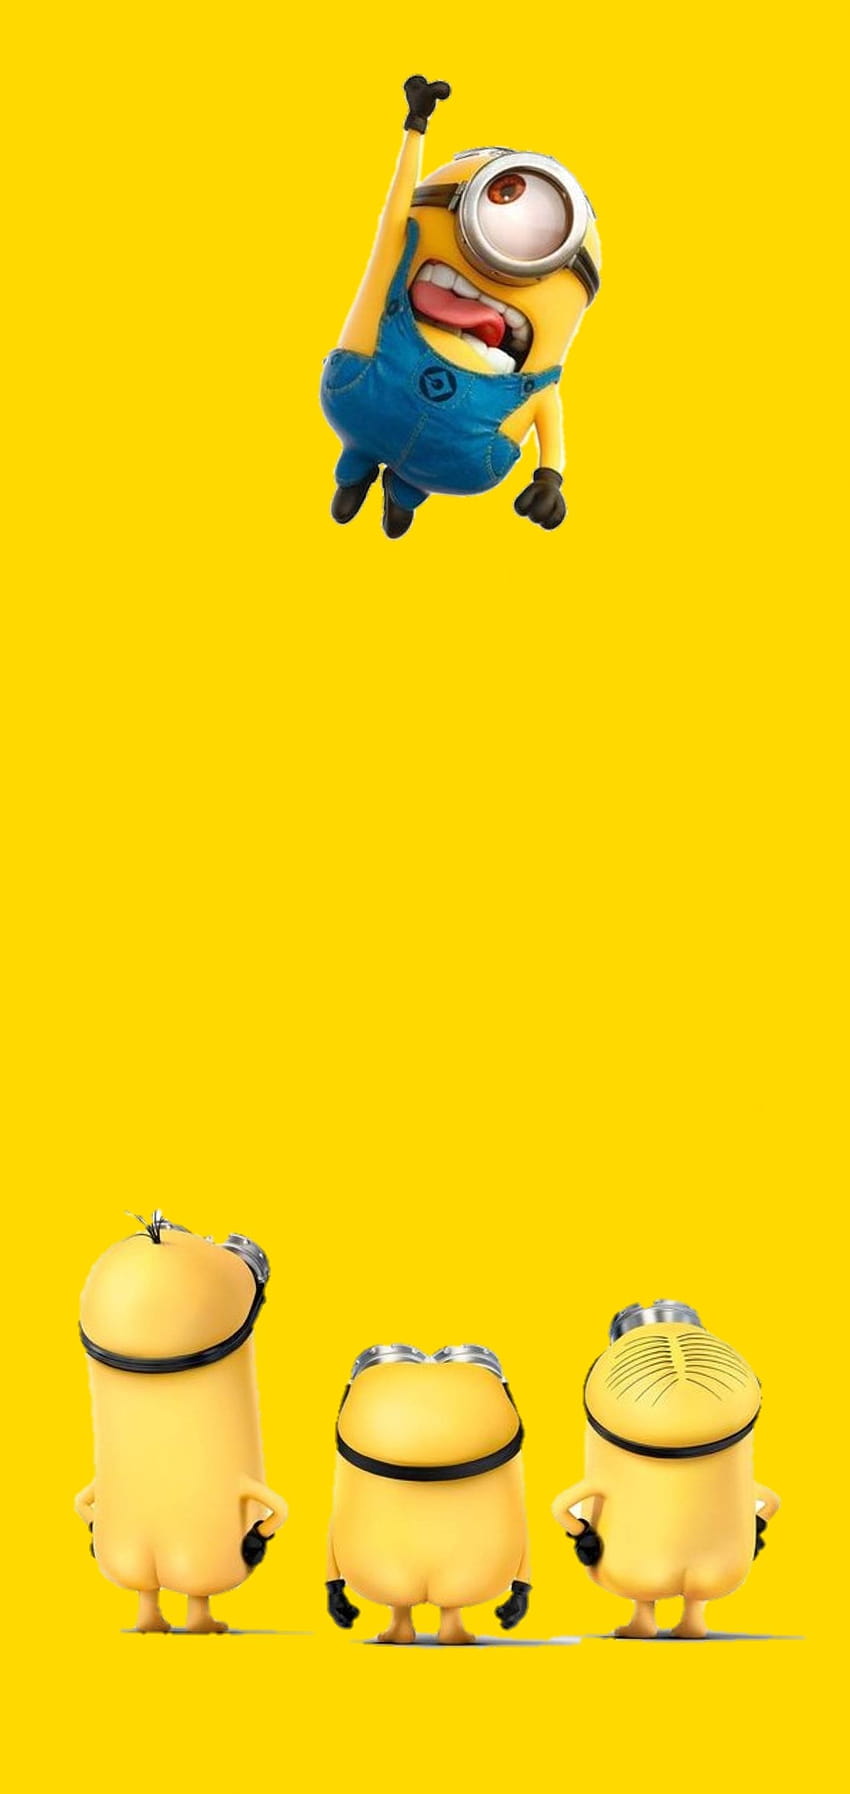 Hole Punch for Samsung Galaxy Note Series, amoled minion HD phone wallpaper